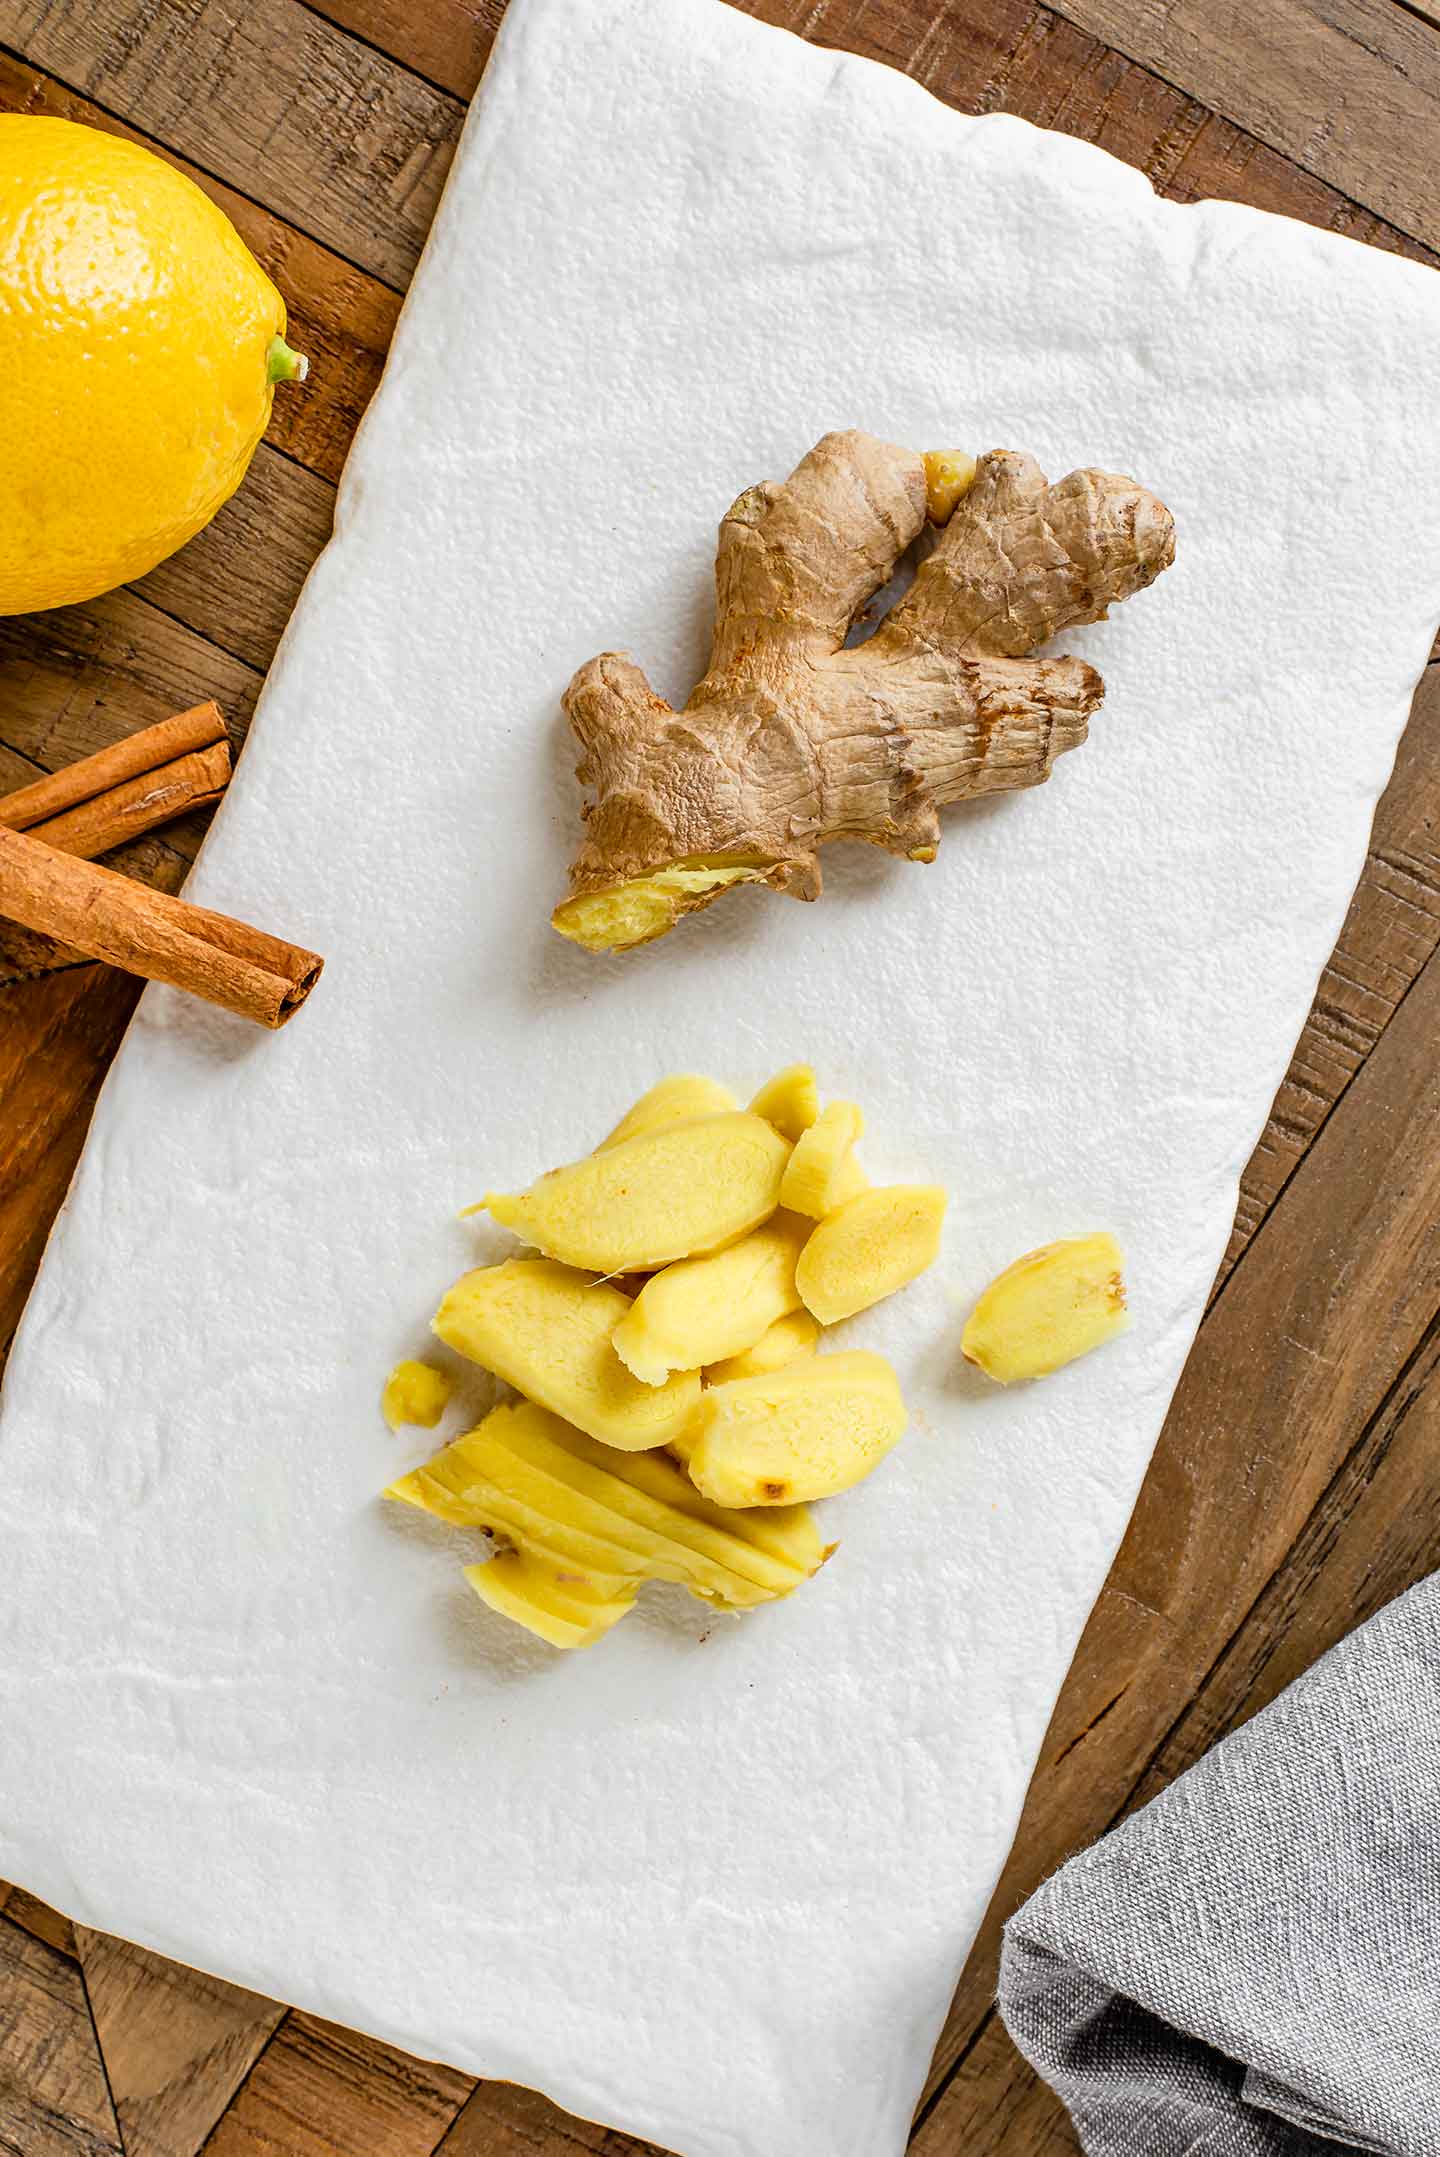 Top down view of peeled and sliced ginger root on a white tray with cinnamon sticks and a lemon.